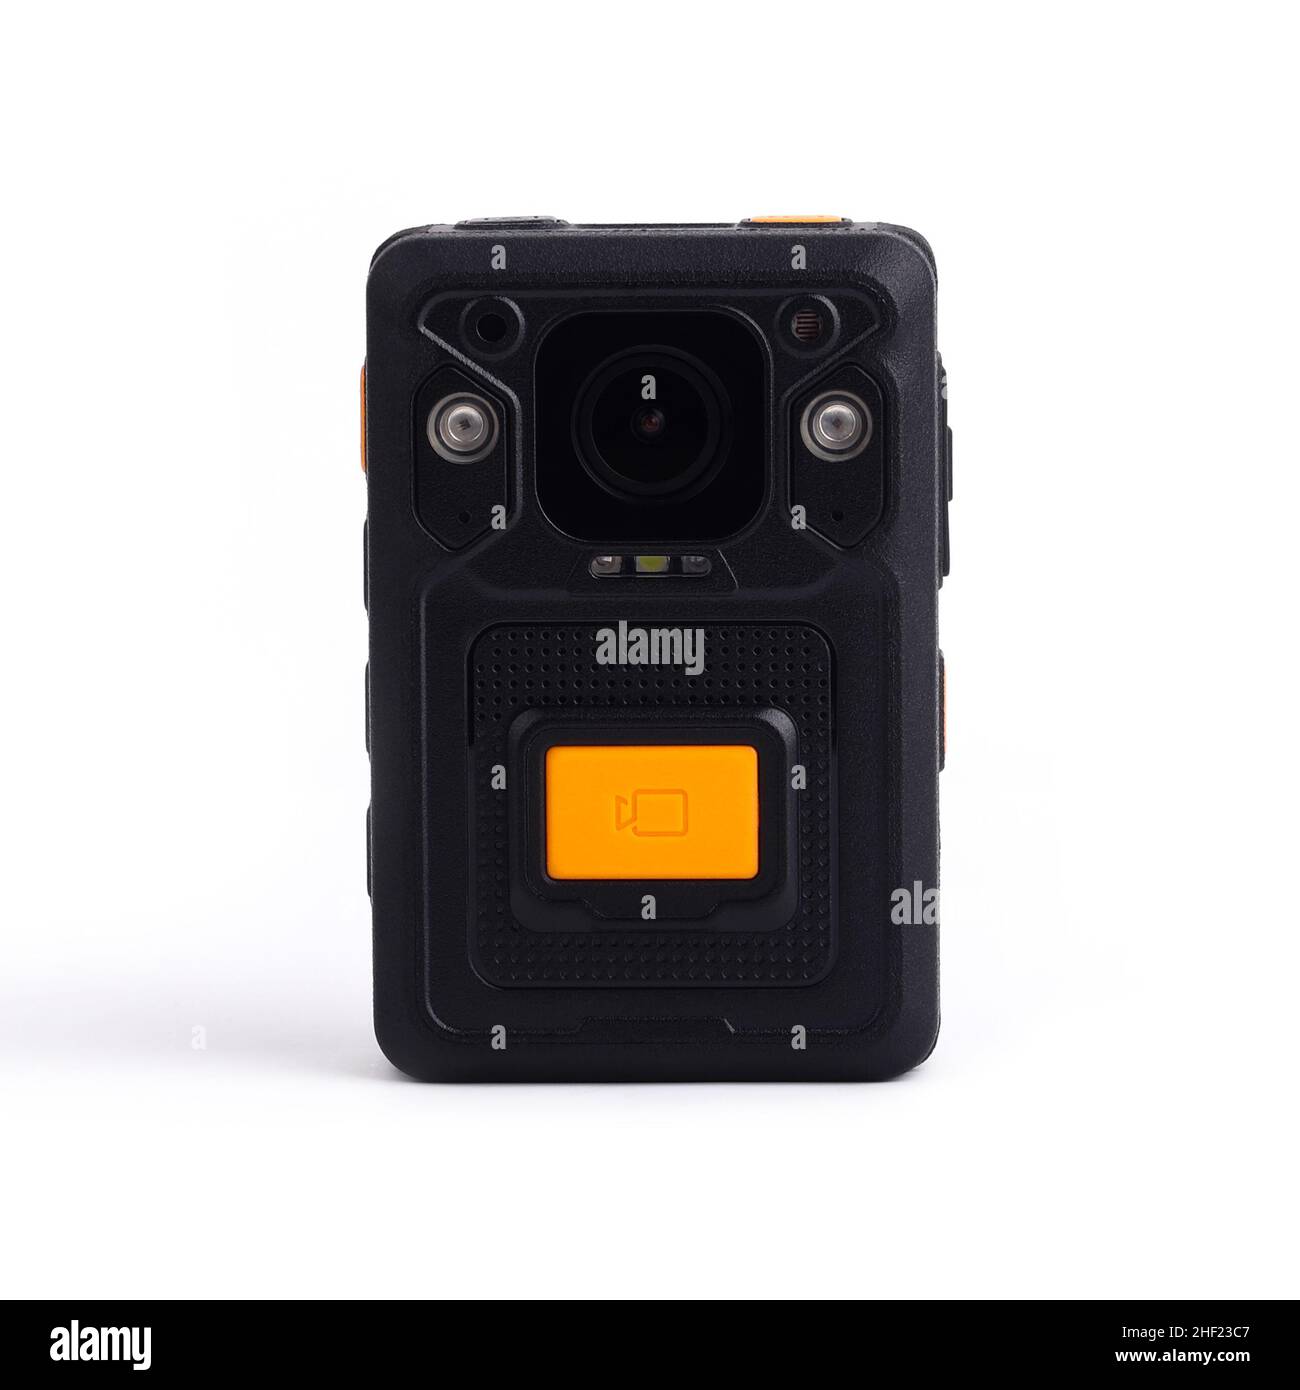 Black Officer body cam with yellow orange button record. Personal Wearable Video Recorder, Portable DVR, camera isolated on white background. Closeup, Stock Photo